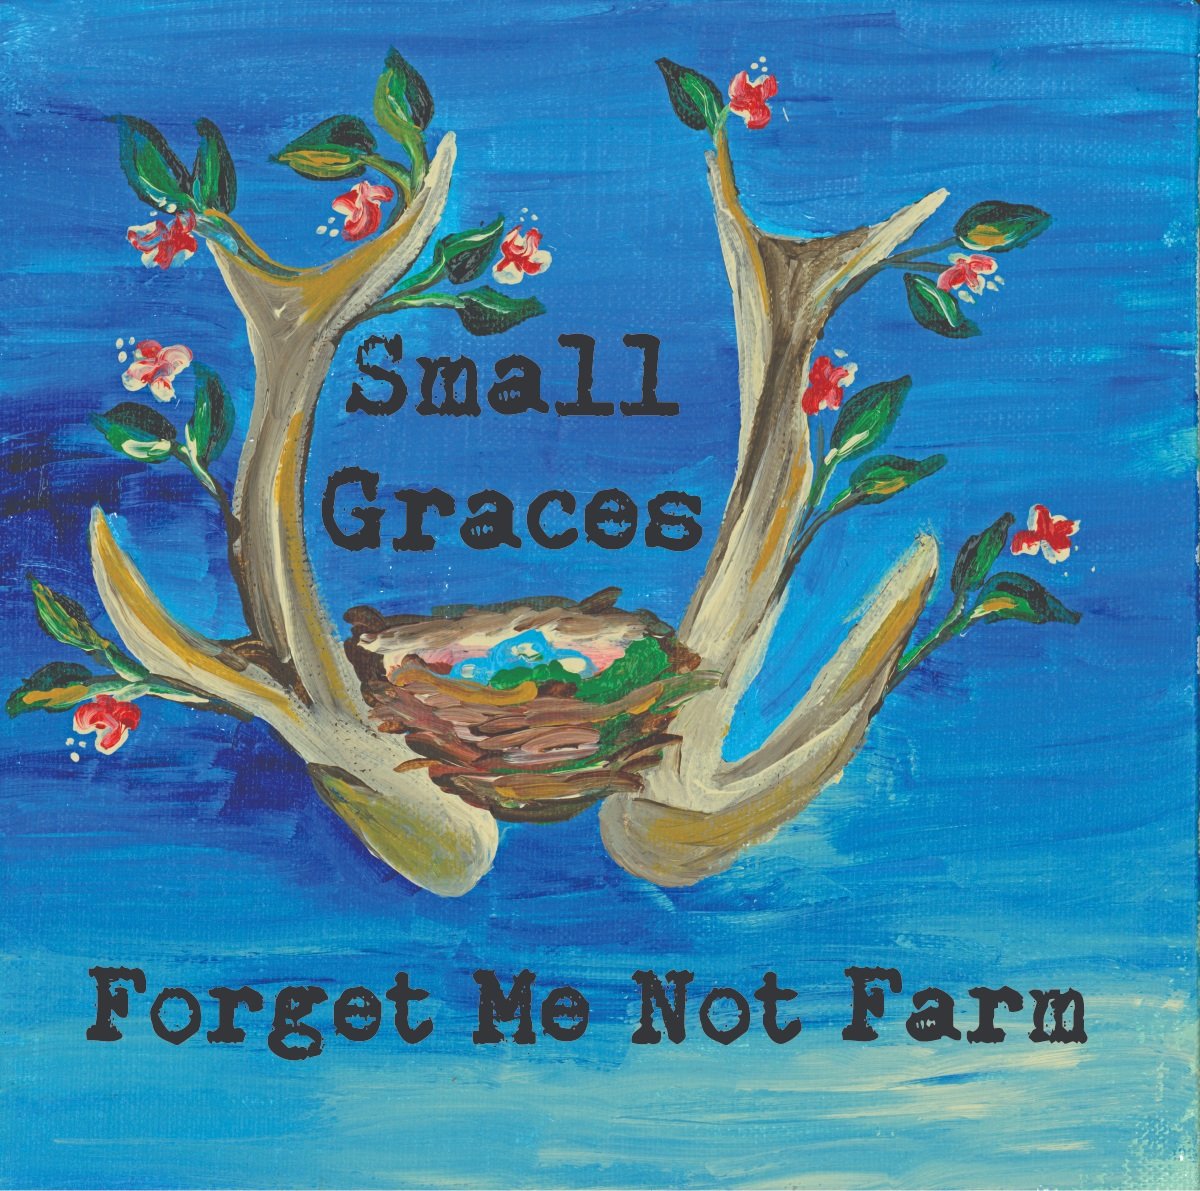 Forget Me Not Farm